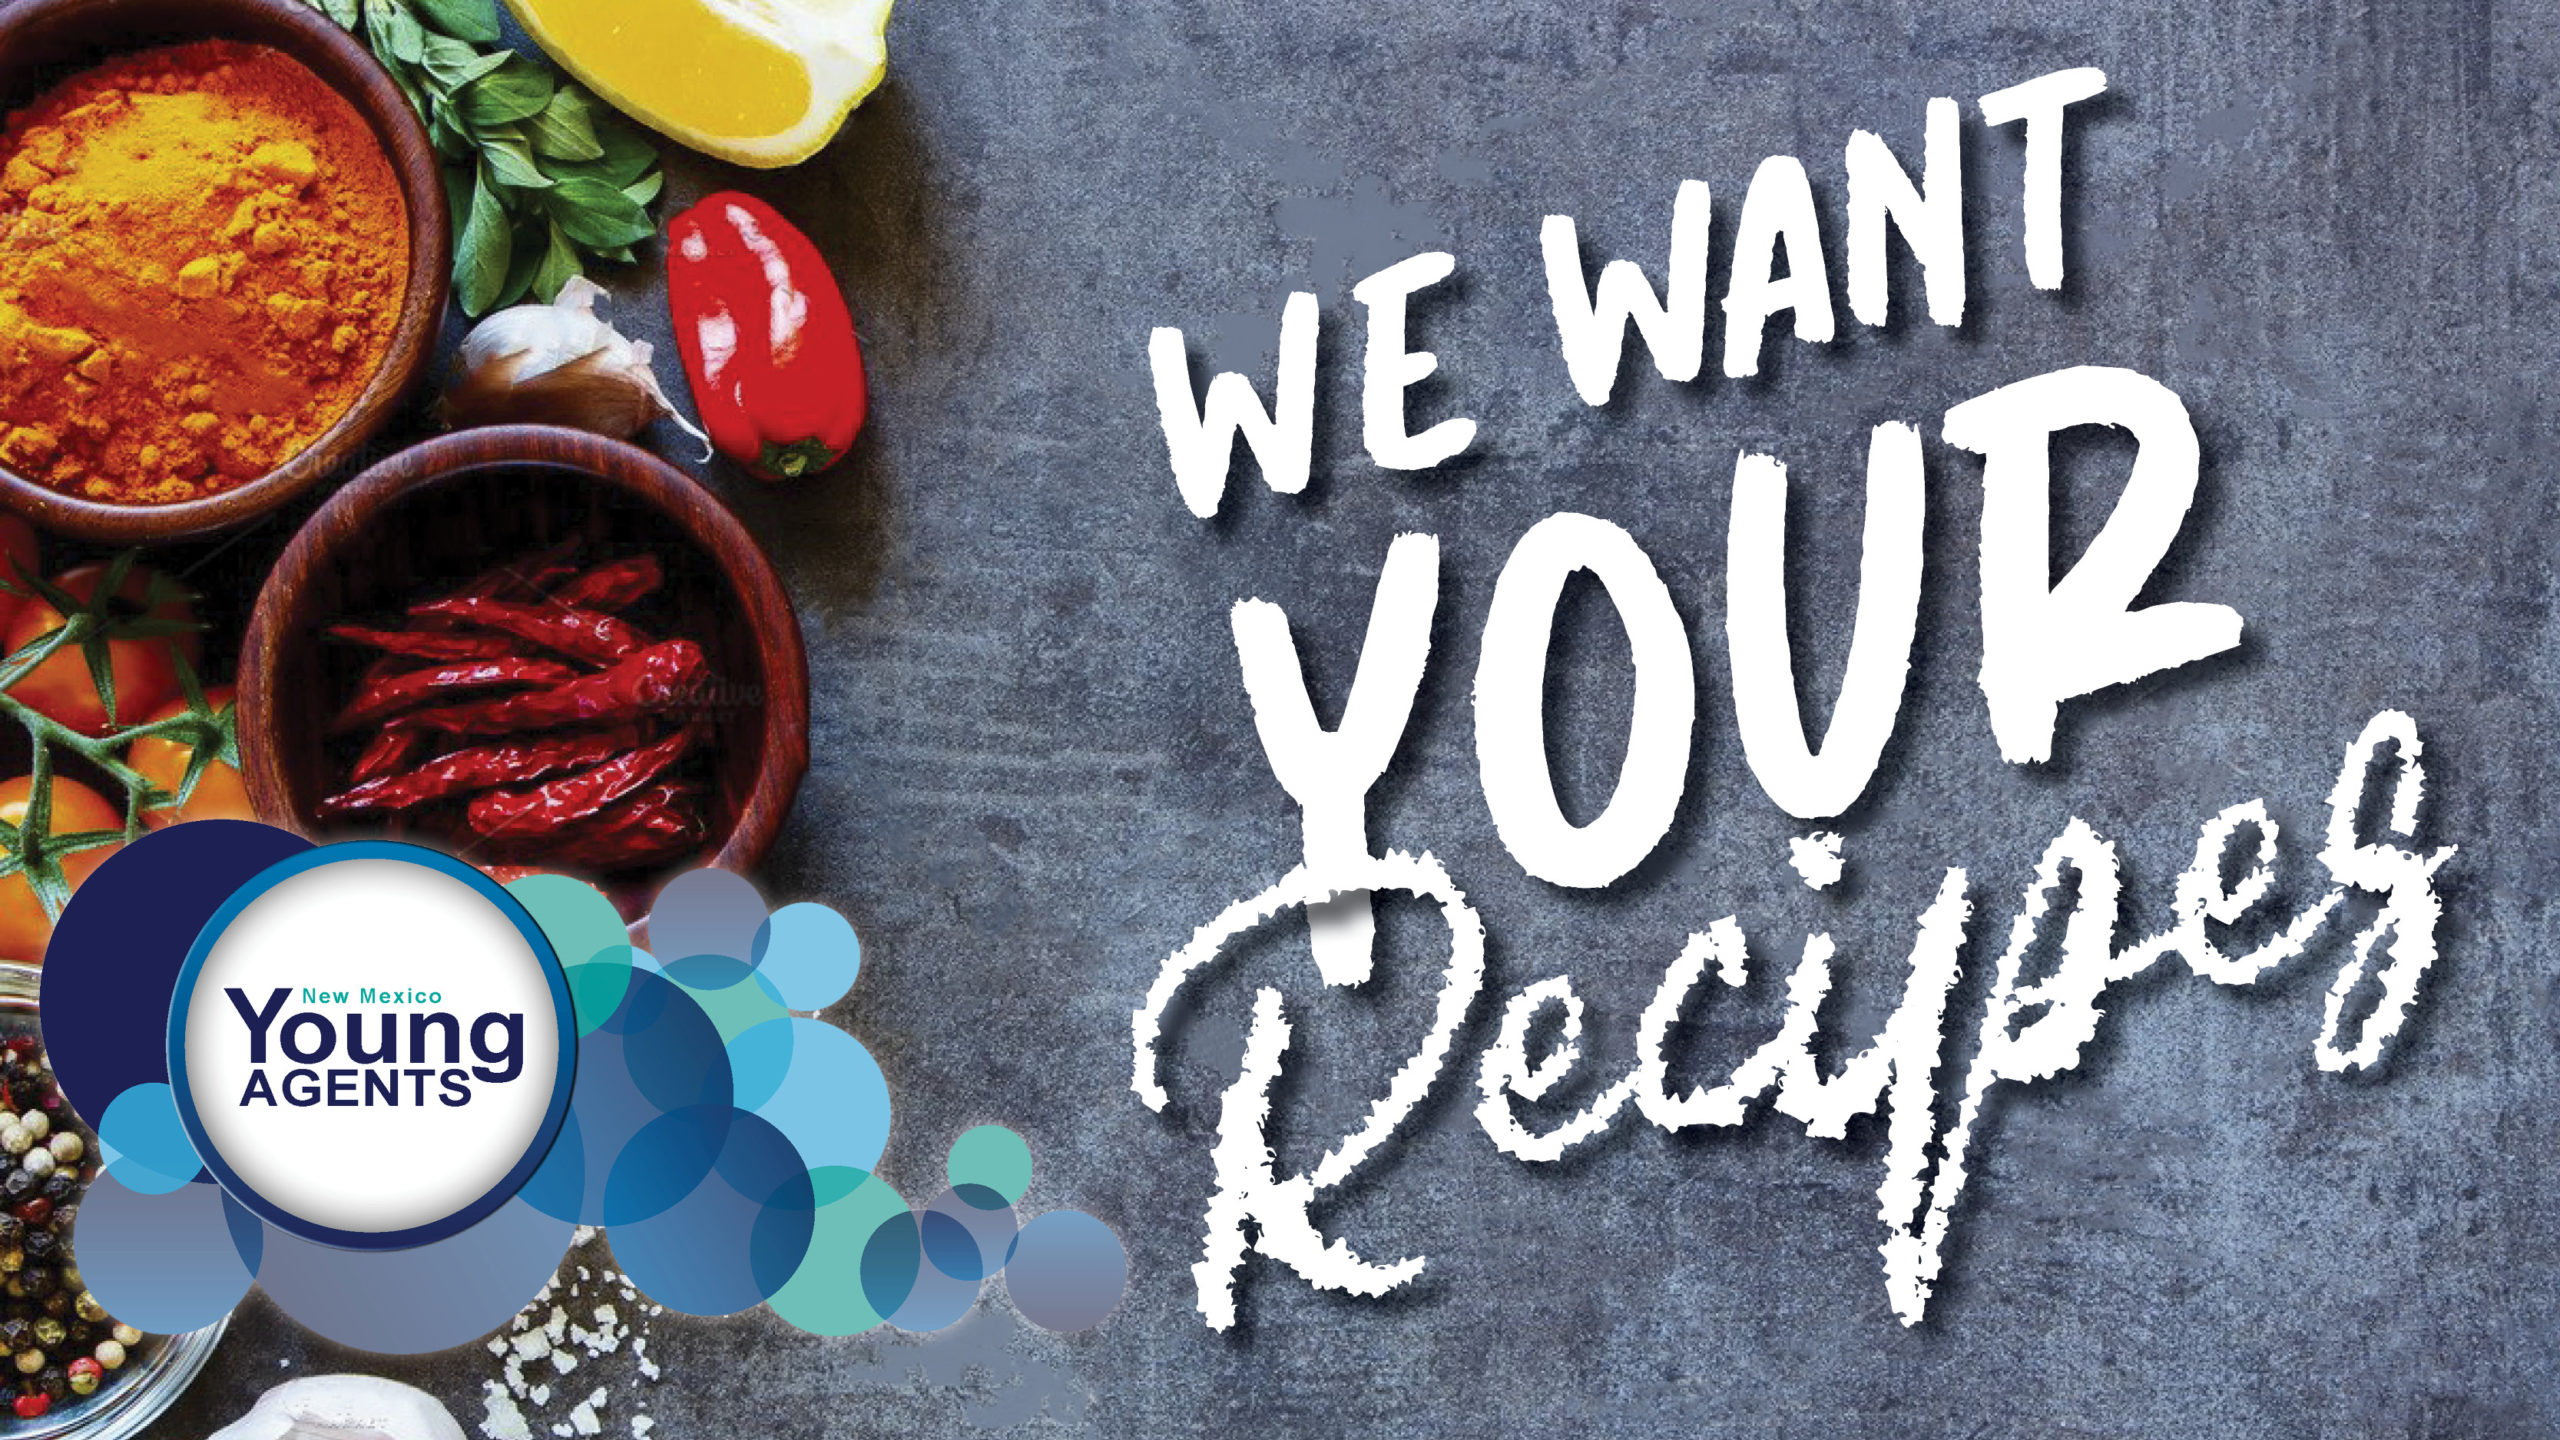 We Want Your Recipes